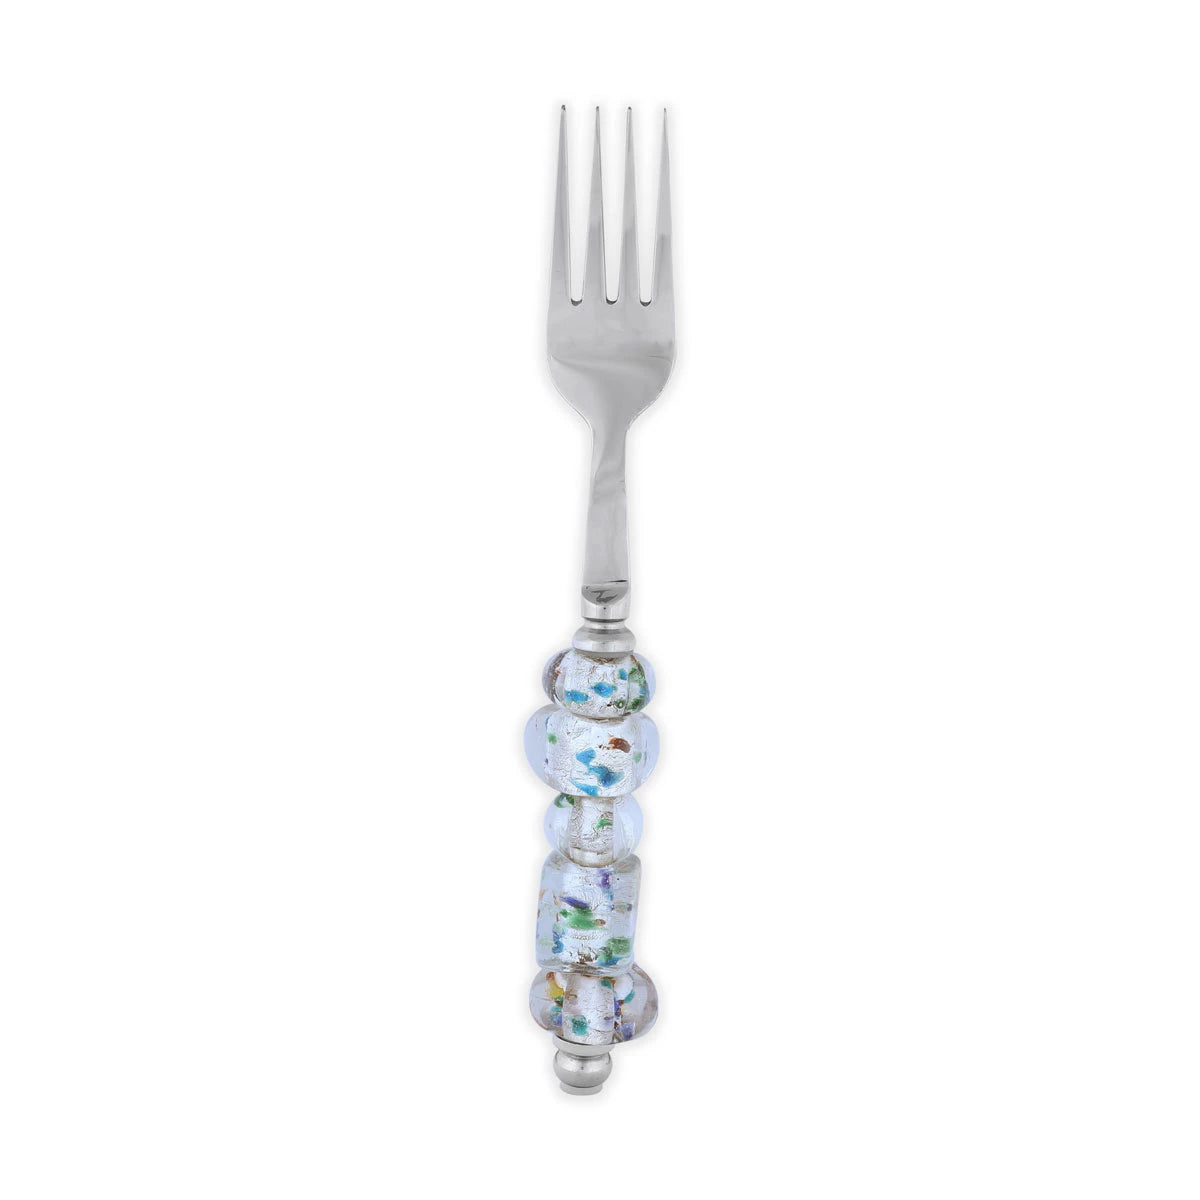 Front View of Glossy Silver Spotted Rock Beads Fork Spoon